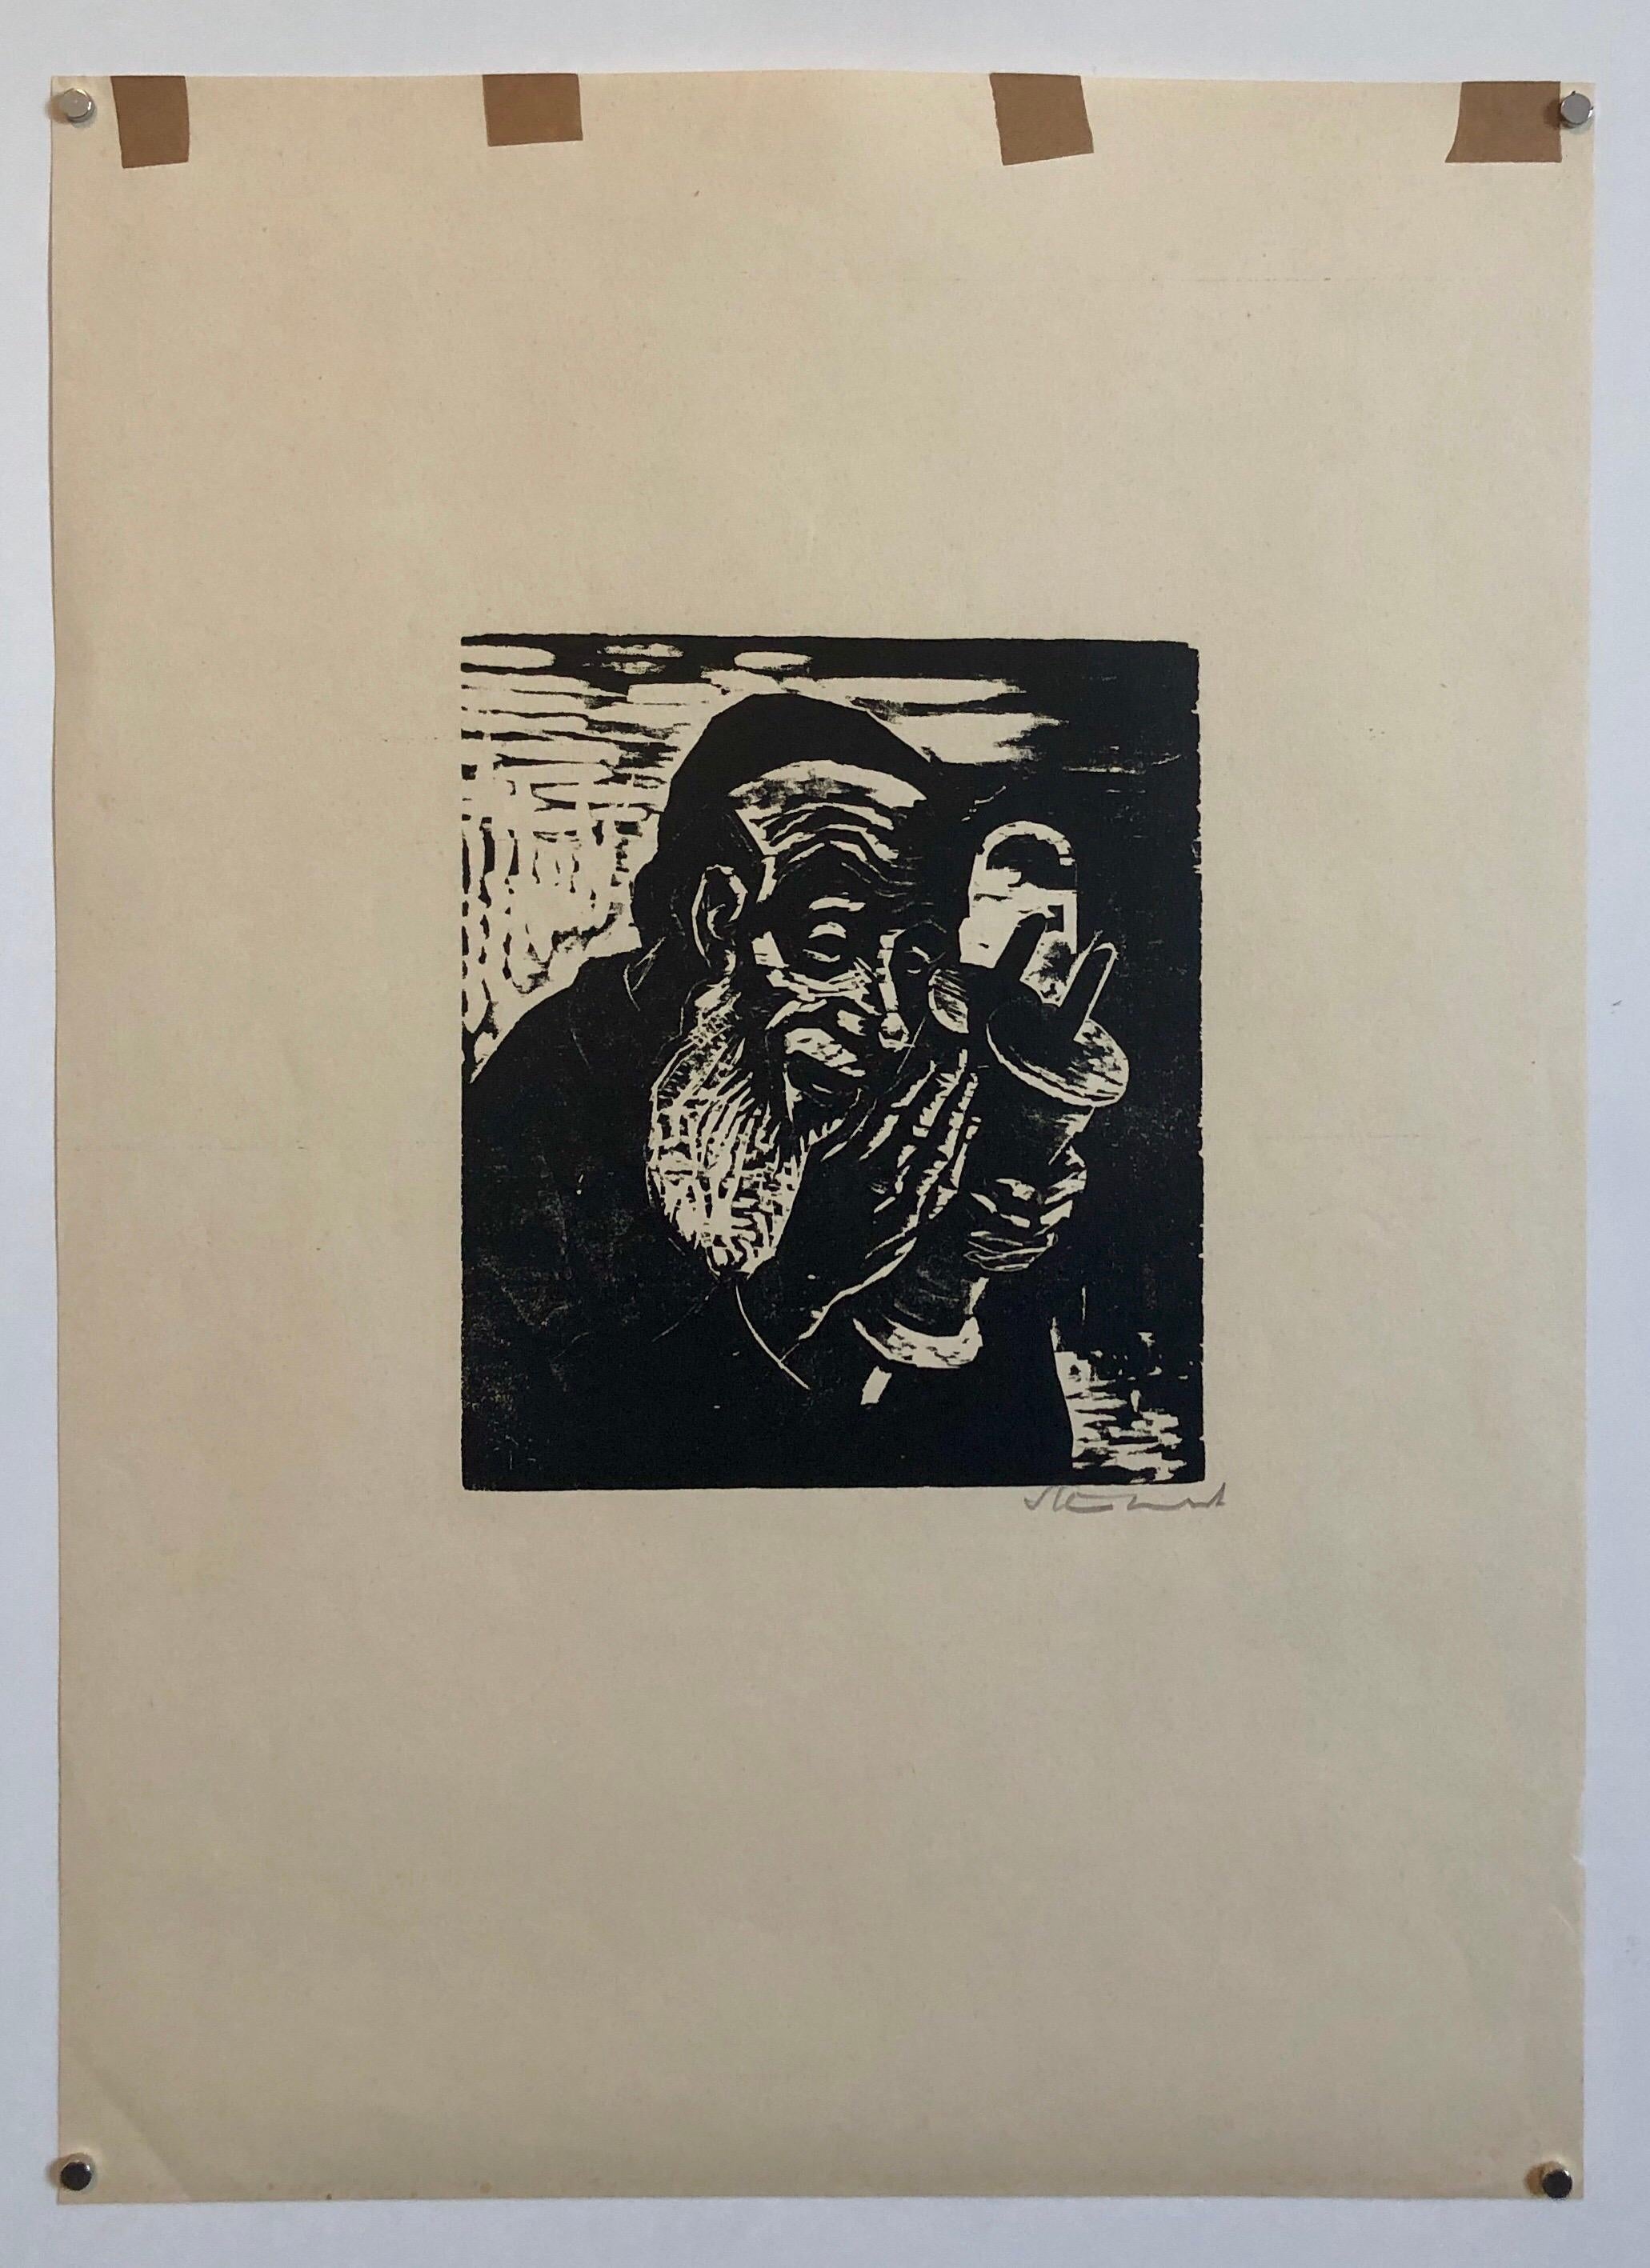 Hand signed in pencil, woodblock print woodcut.

Jacob  Steinhardt 
1887-1968
 
Steinhardt, Jakob, Painter and Woodcut Artist. b. 1887, Yaacov Steinhardt was born in the then remote, largely Polish town of Zerkow in the Posen District of Germany.